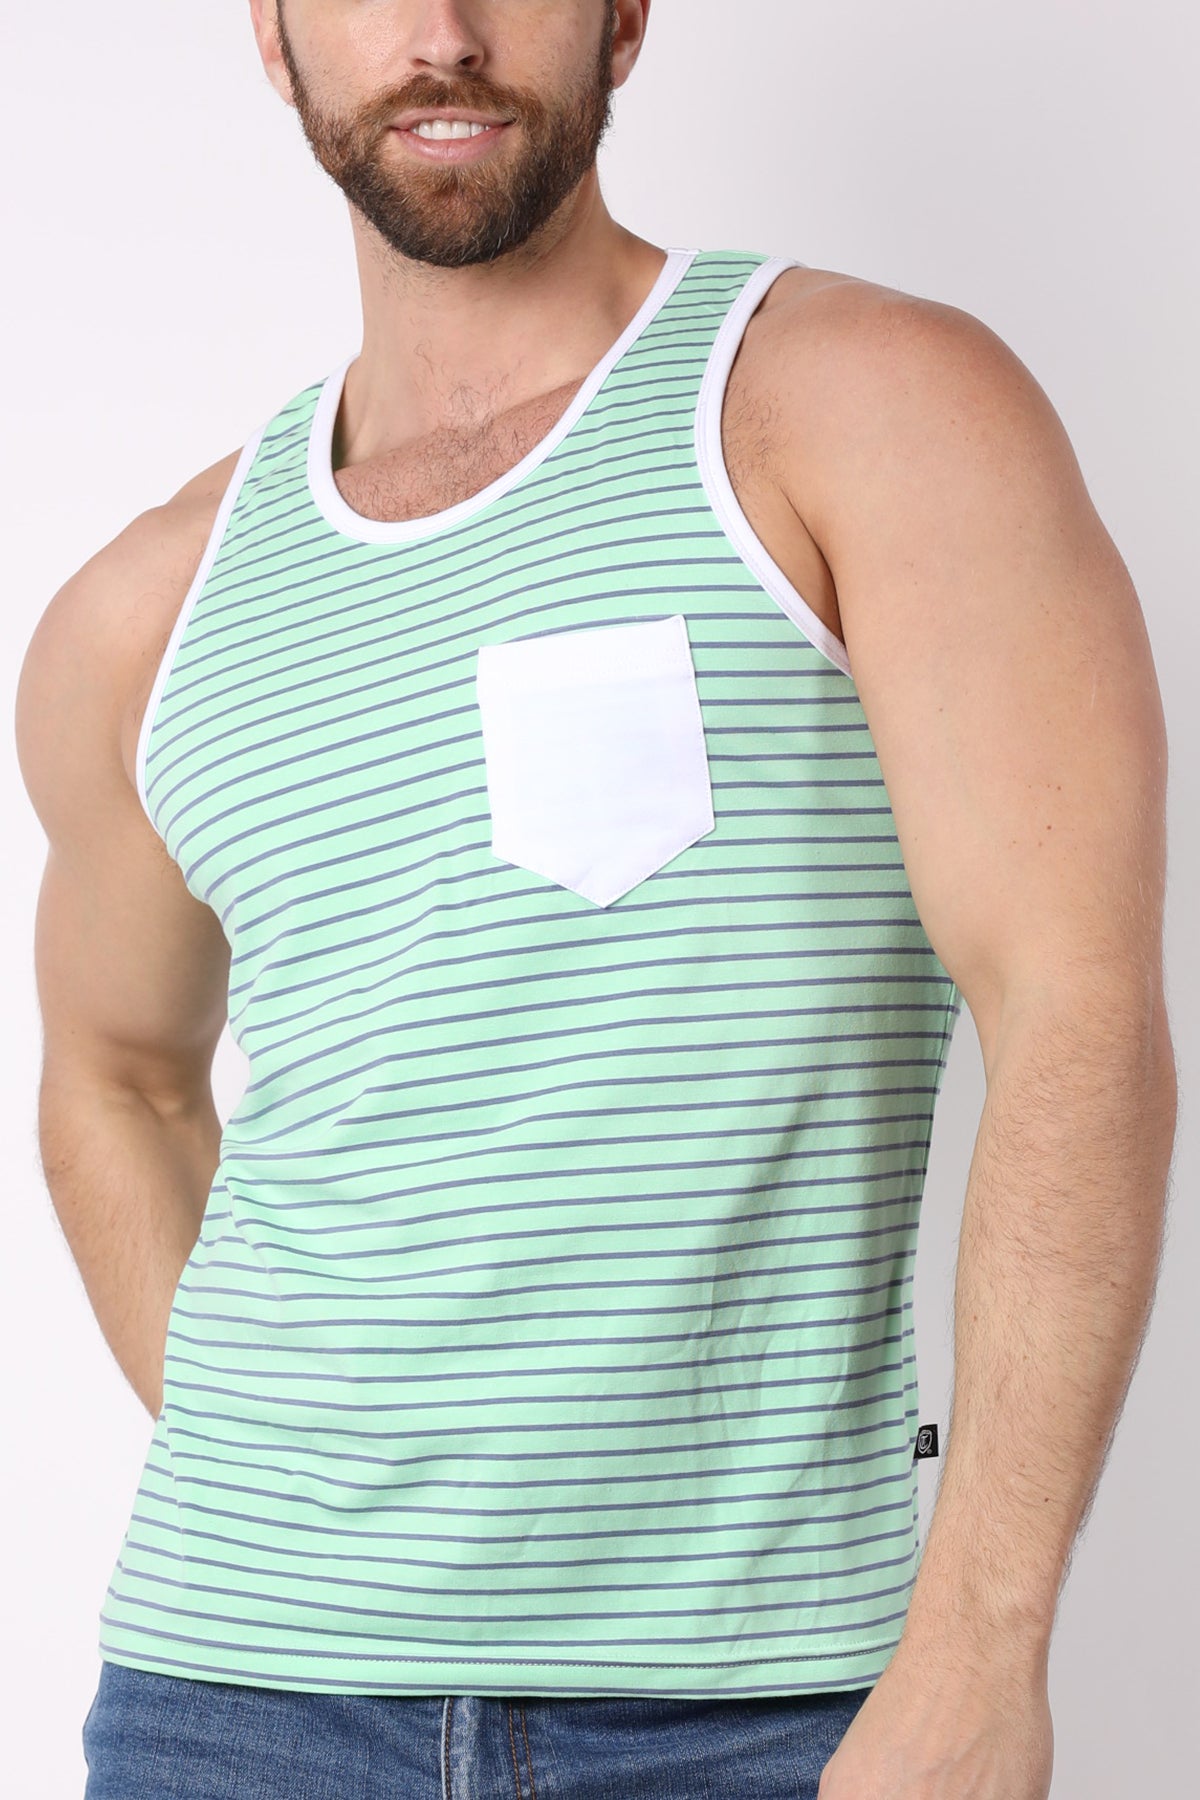 Coral Sands Striped Tank Top - TIMOTEO